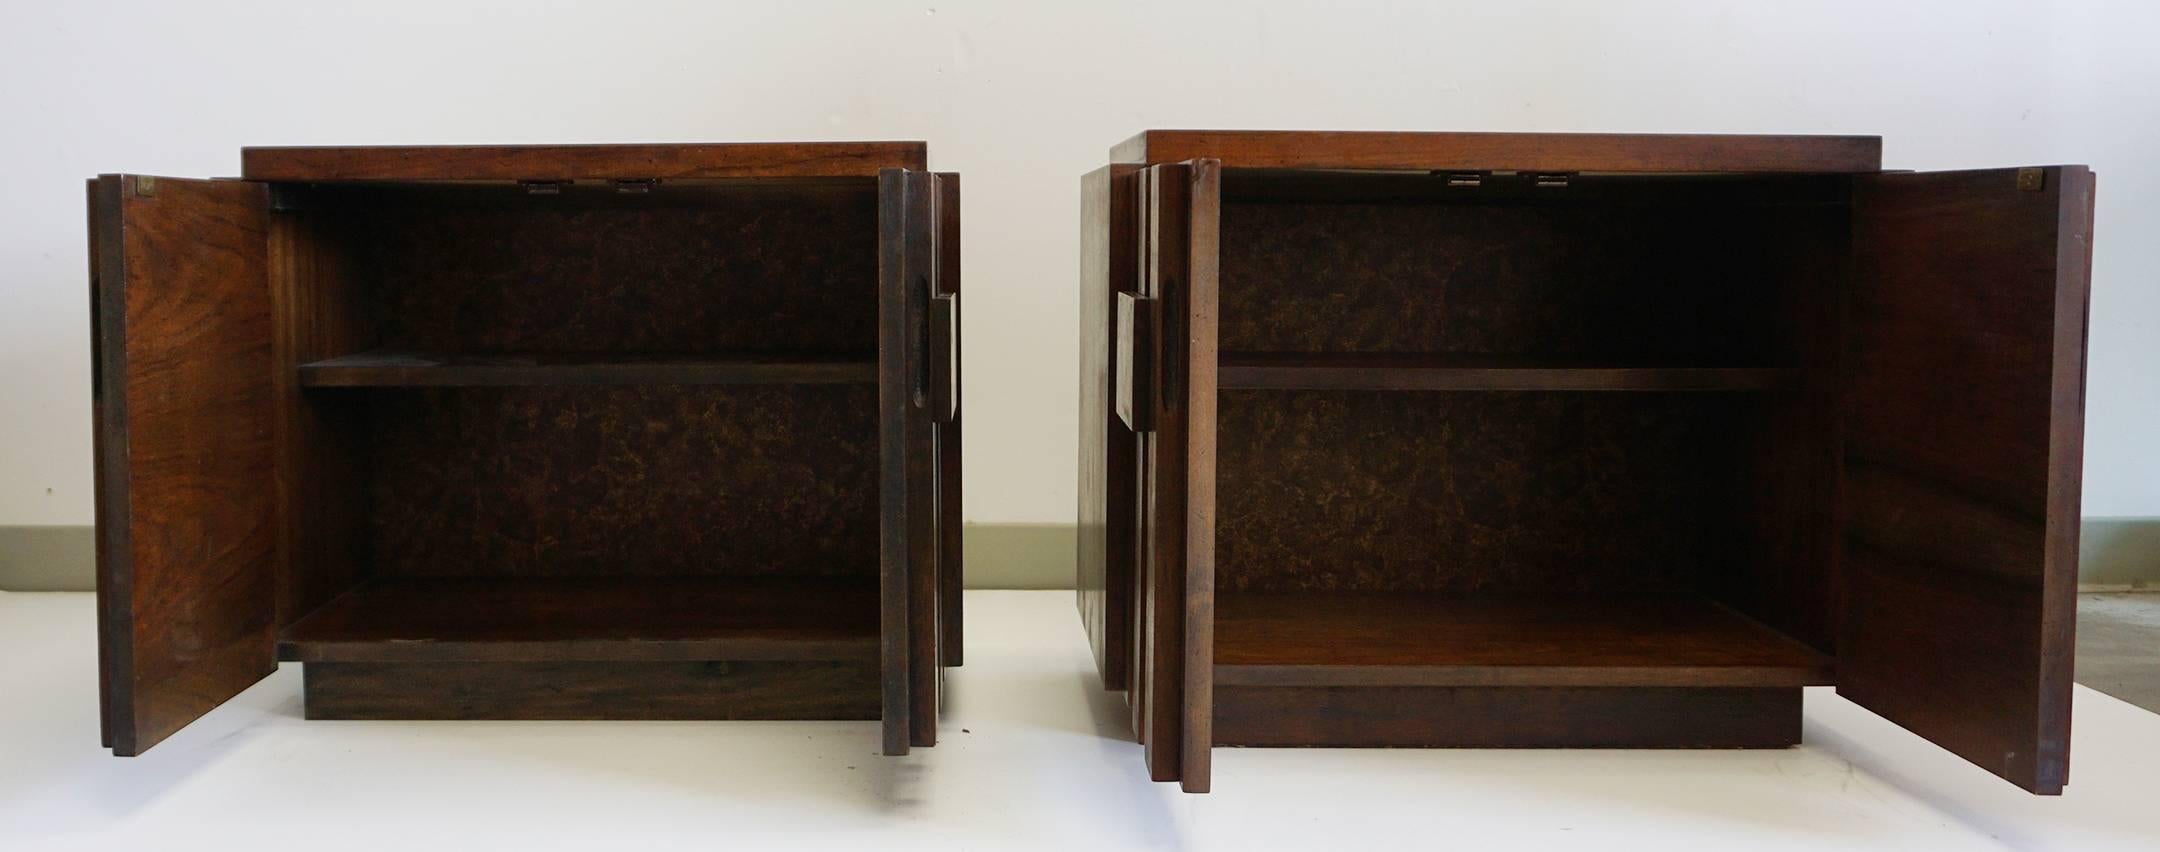 Mid-Century Modern Brutalist side tables or nightstands made by Lane in the style of Paul Evans with Mosaic collection chunk block details on the doors.

Mid-Century striking pair of Lane nightstands or end tables in the style of Paul Evans with